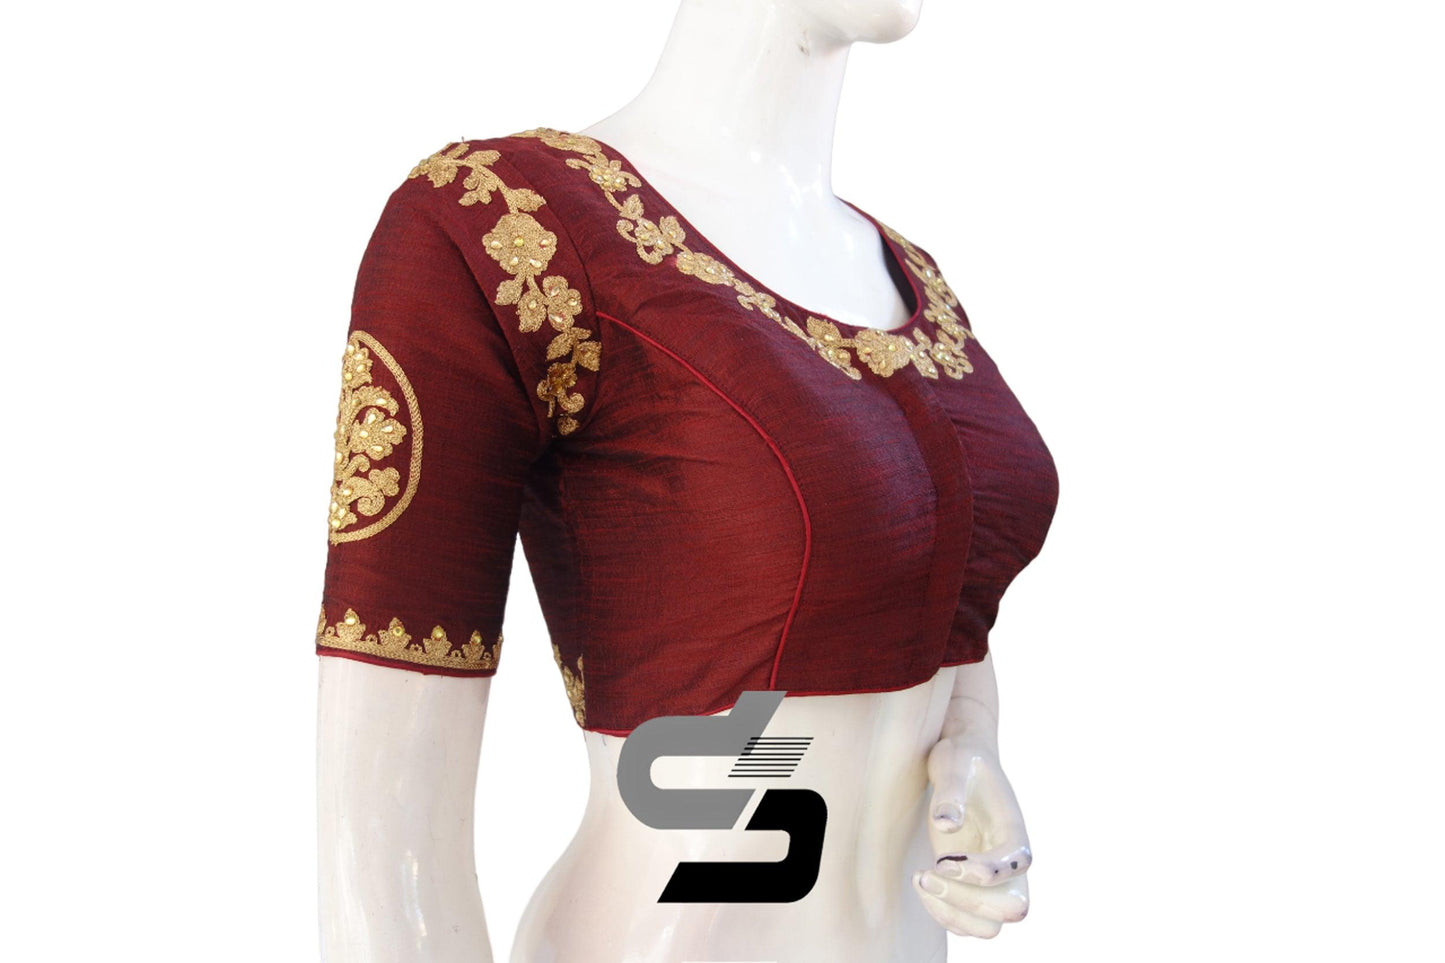 Maroon Color High Neck Designer Embroidery Readymade Saree Blouses, Add a lively twist to your look. - D3blouses